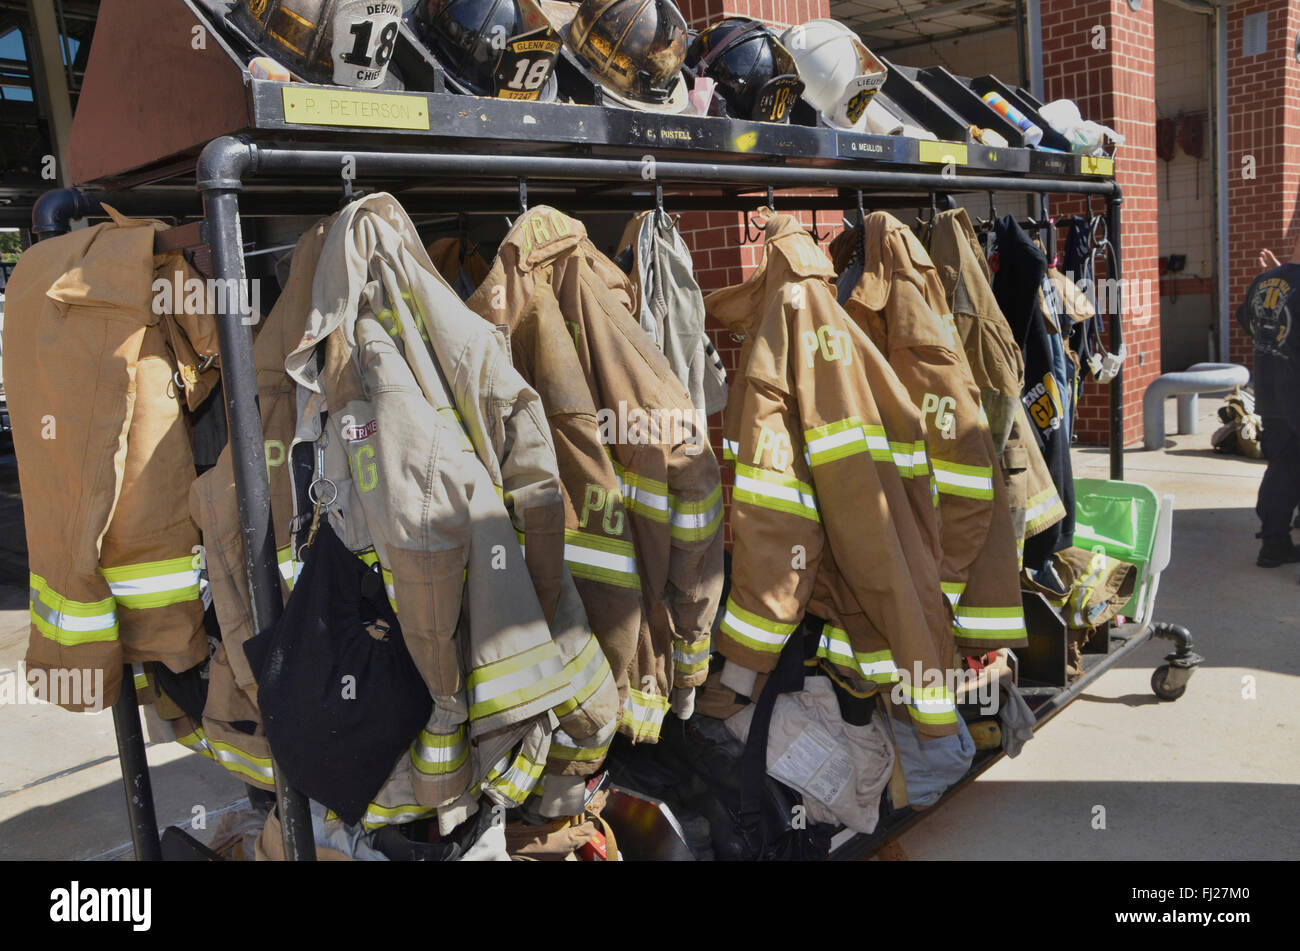 firefighters turnout gear hanging on racks outside Stock Photo